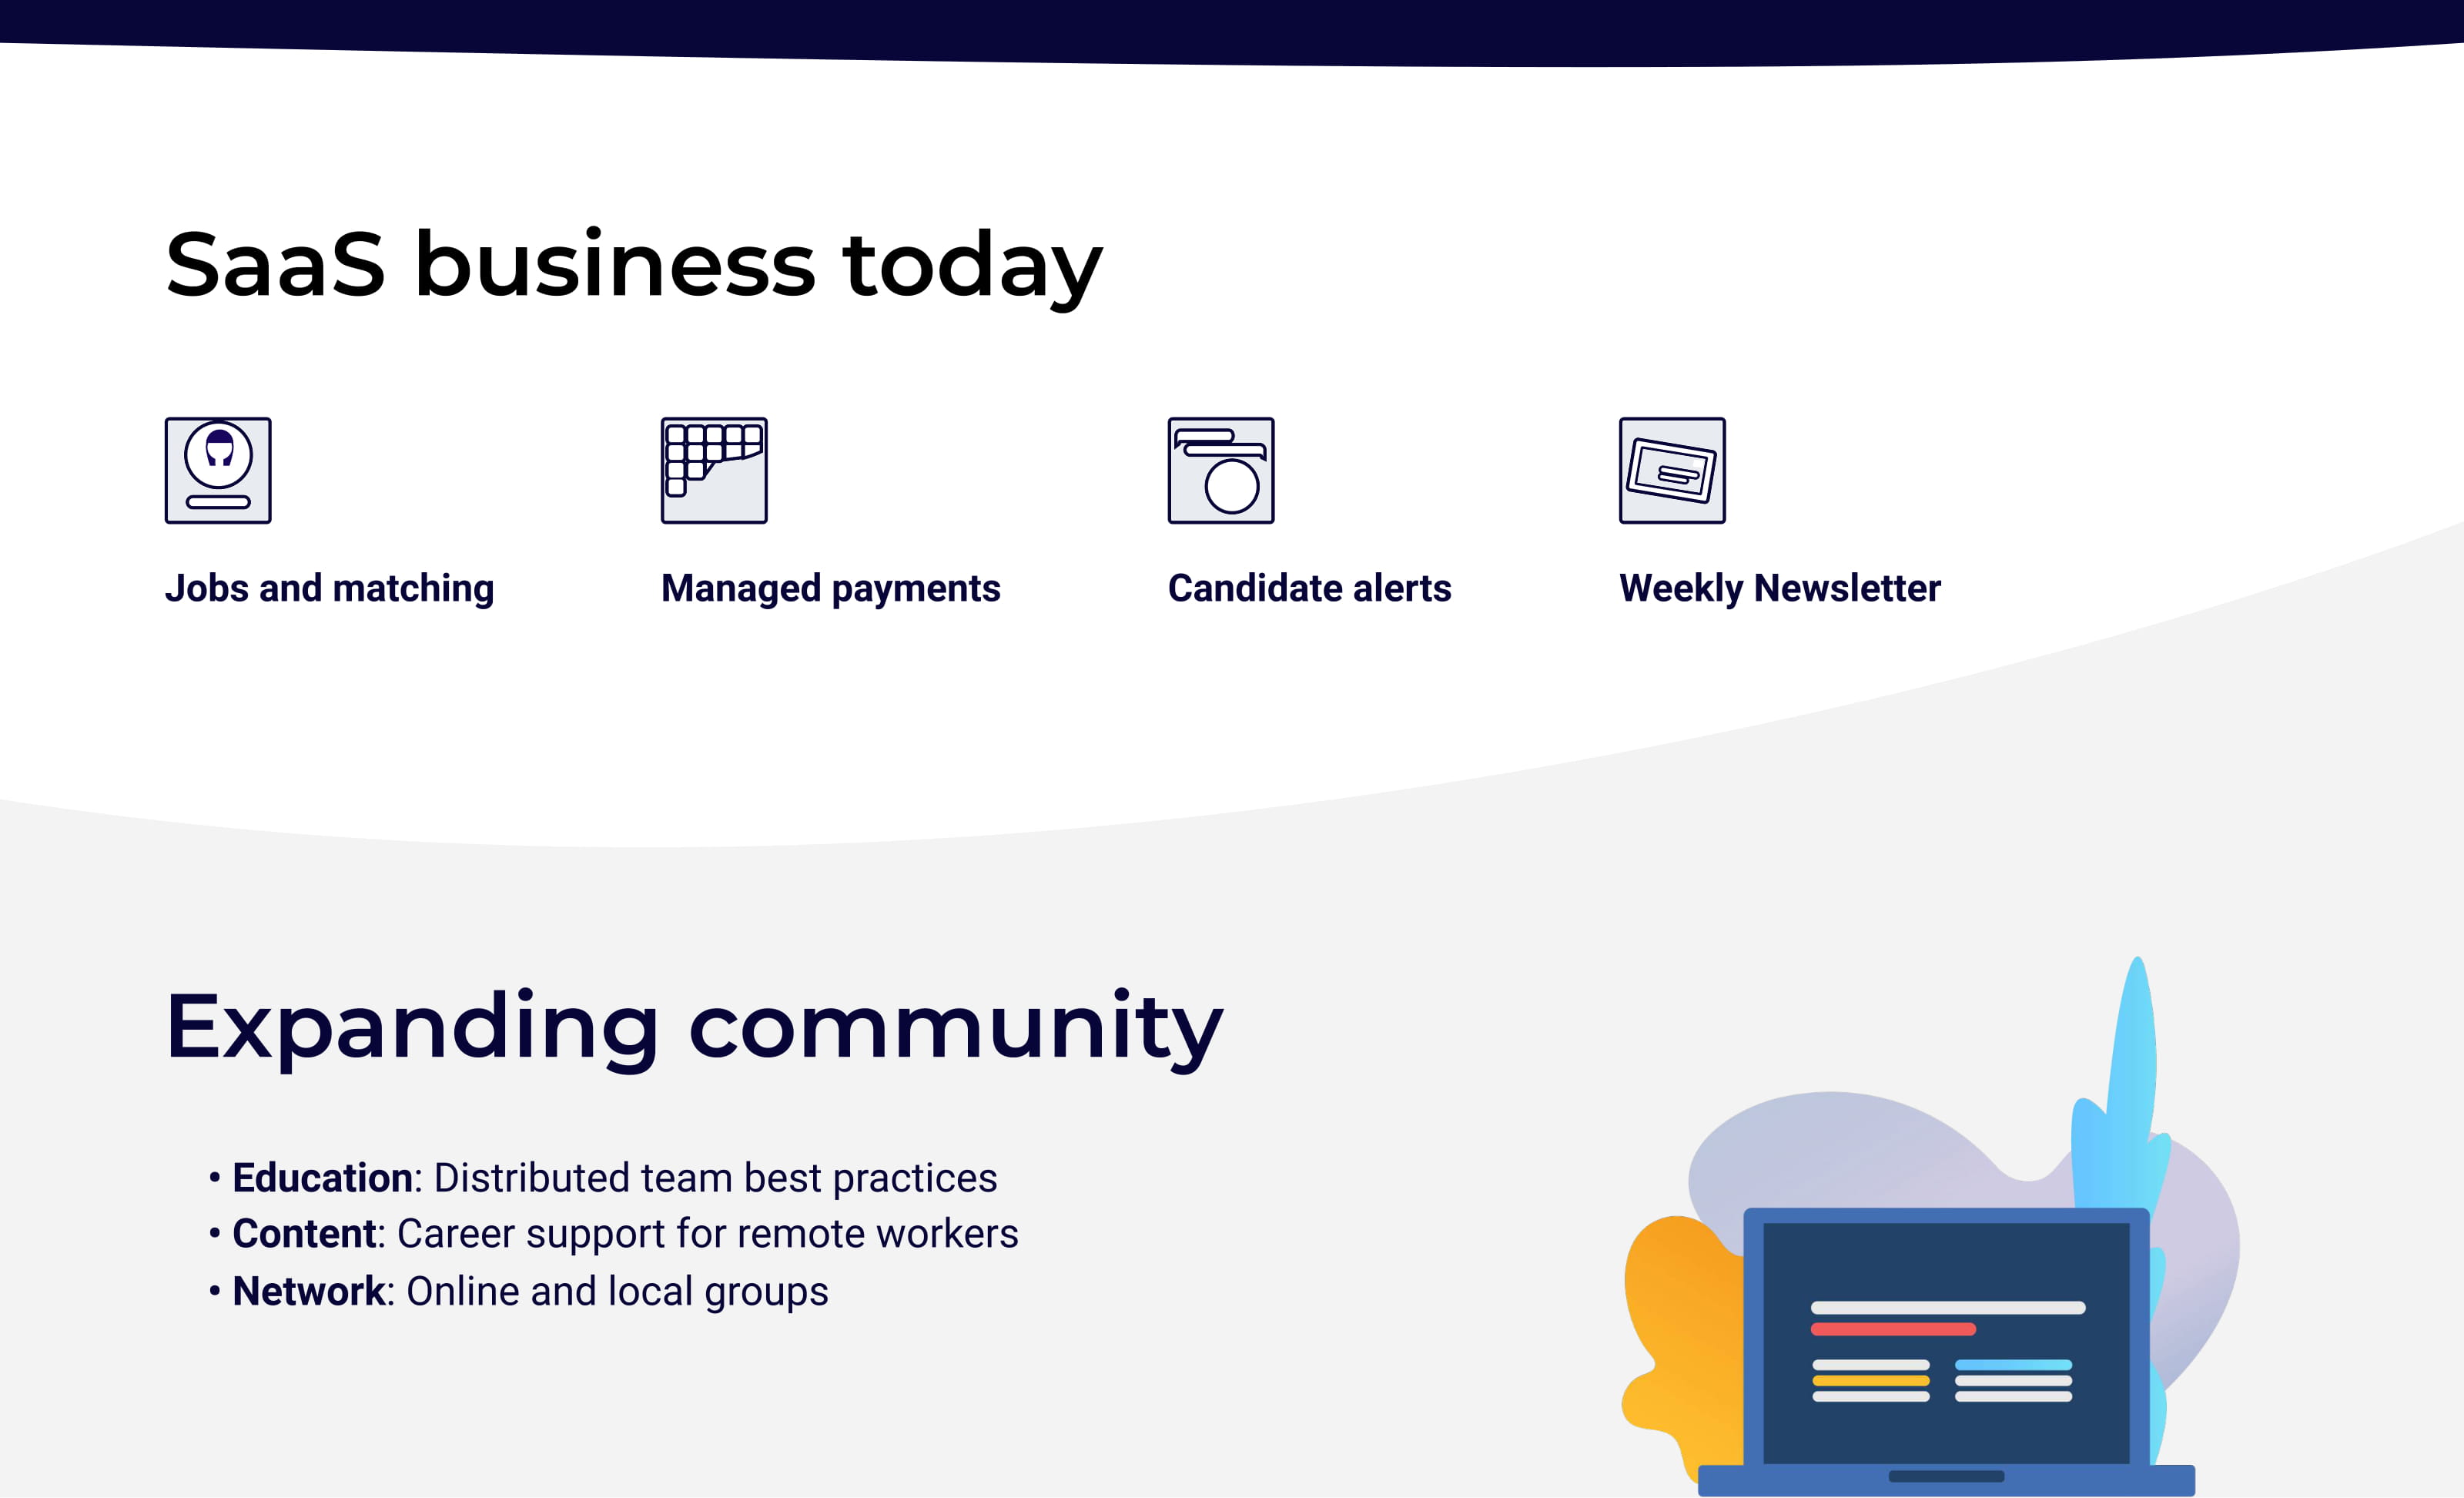 Moonlight pitch deck - today's SaaS business